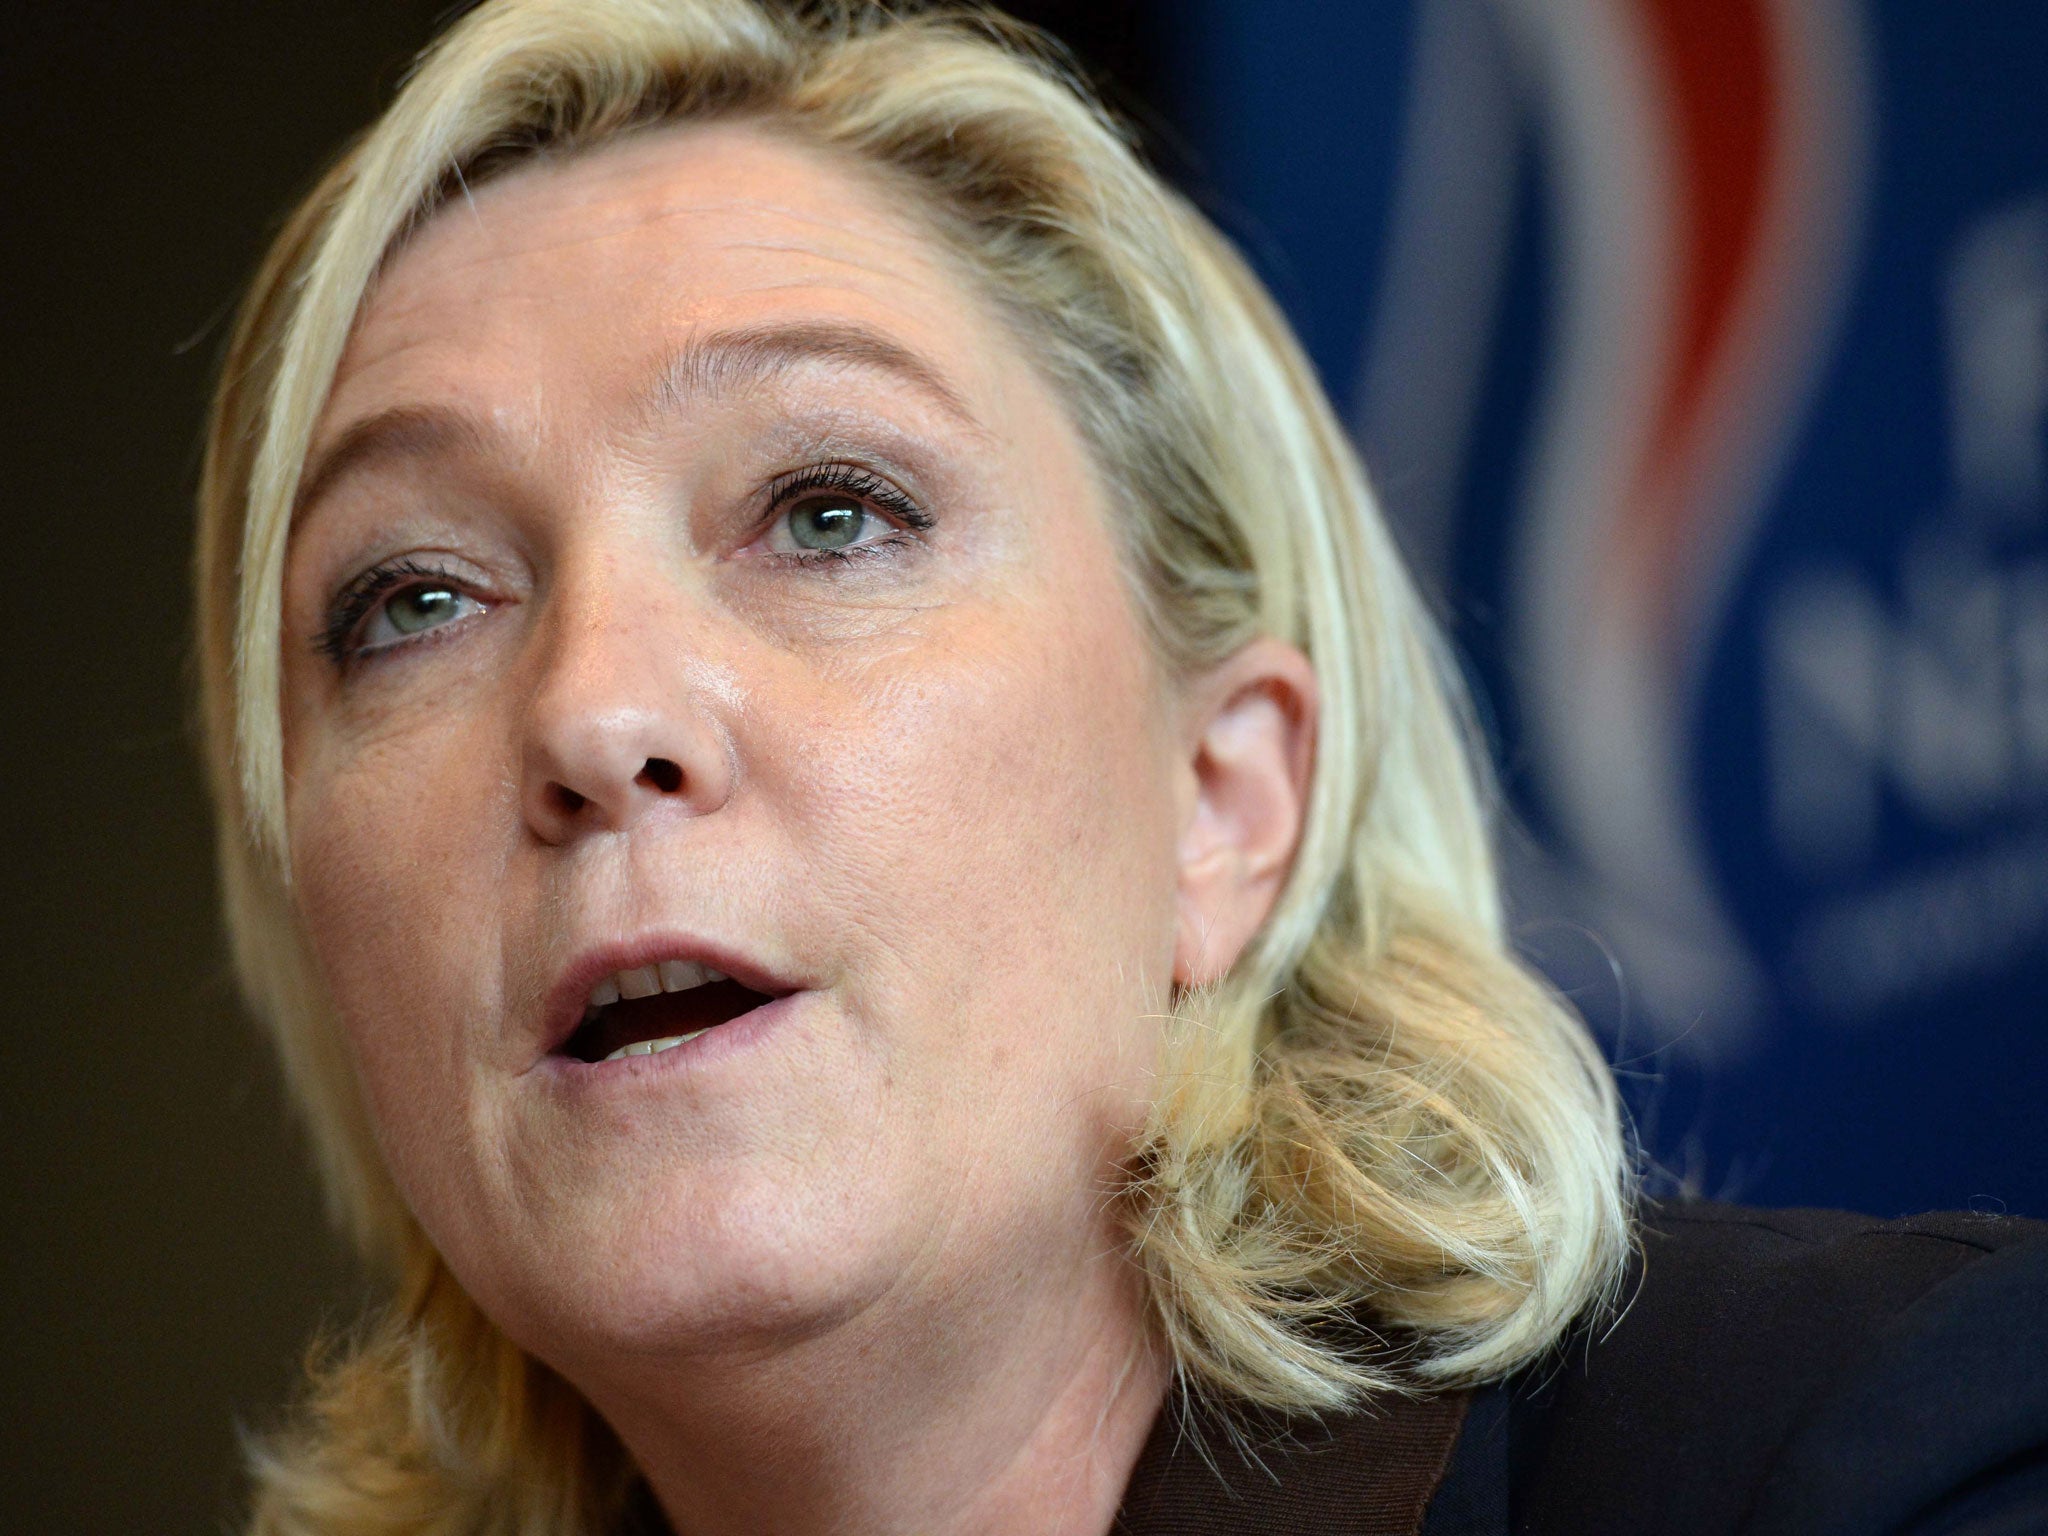 The court would challenge the measure proposed by the leader of the National Rally party – previously known as the National Front – and be likely to declare it unconstitutional